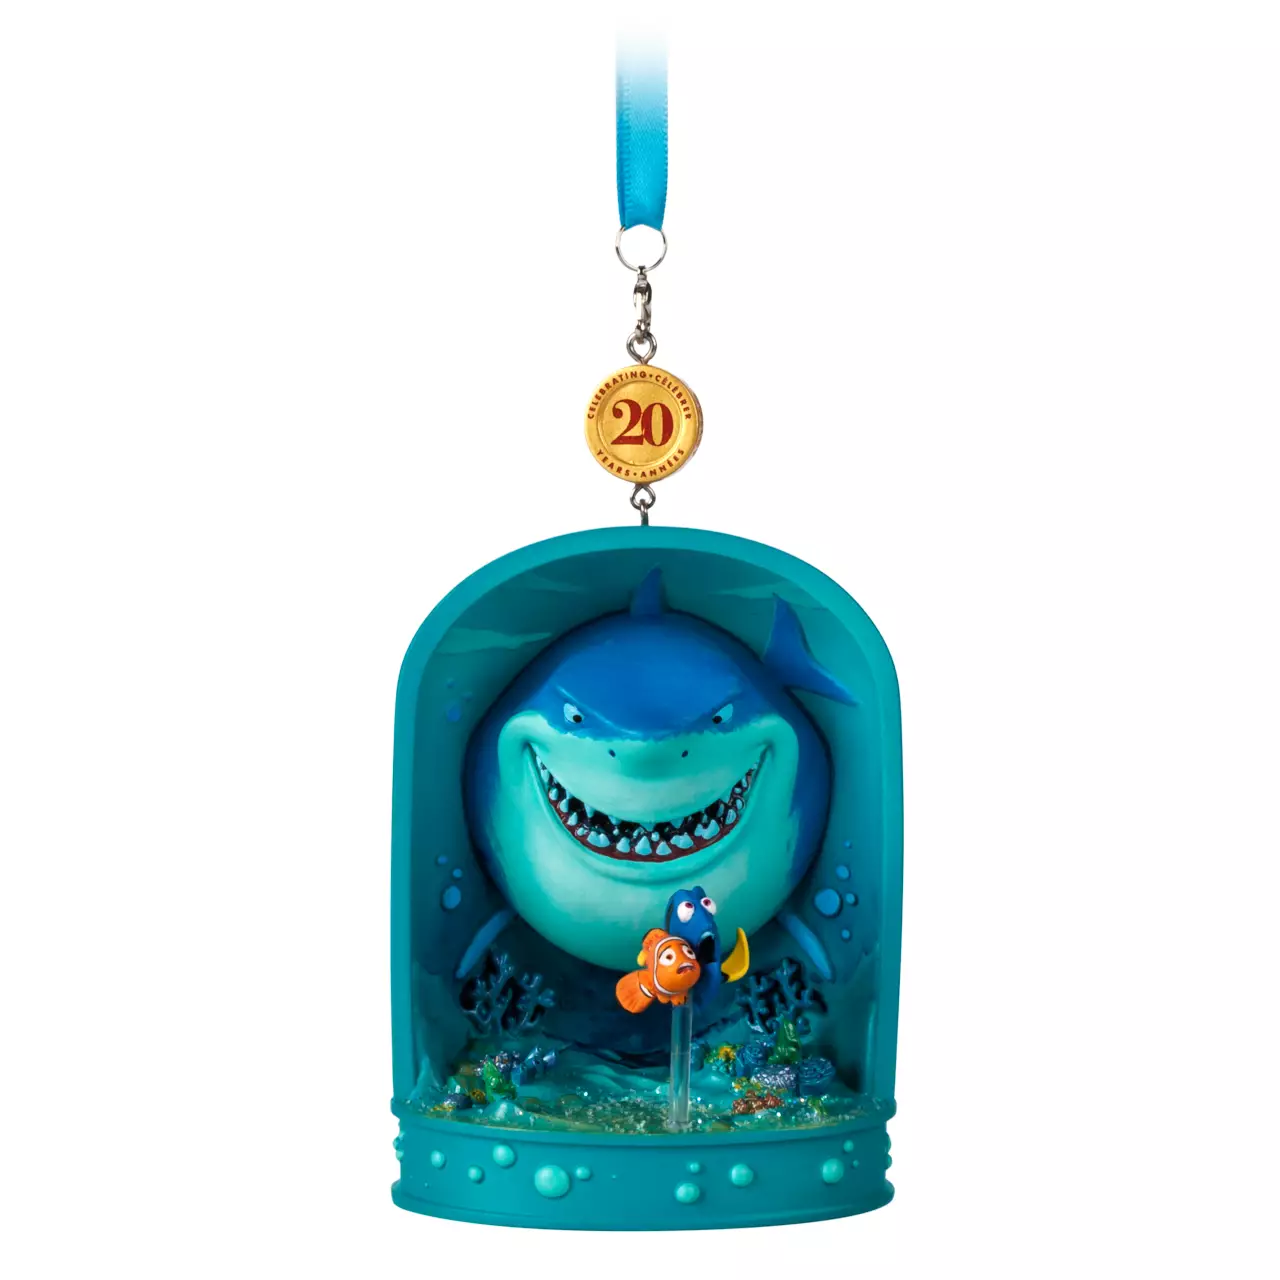 Finding Nemo Legacy Sketchbook Christmas Ornament – 20th Anniversary